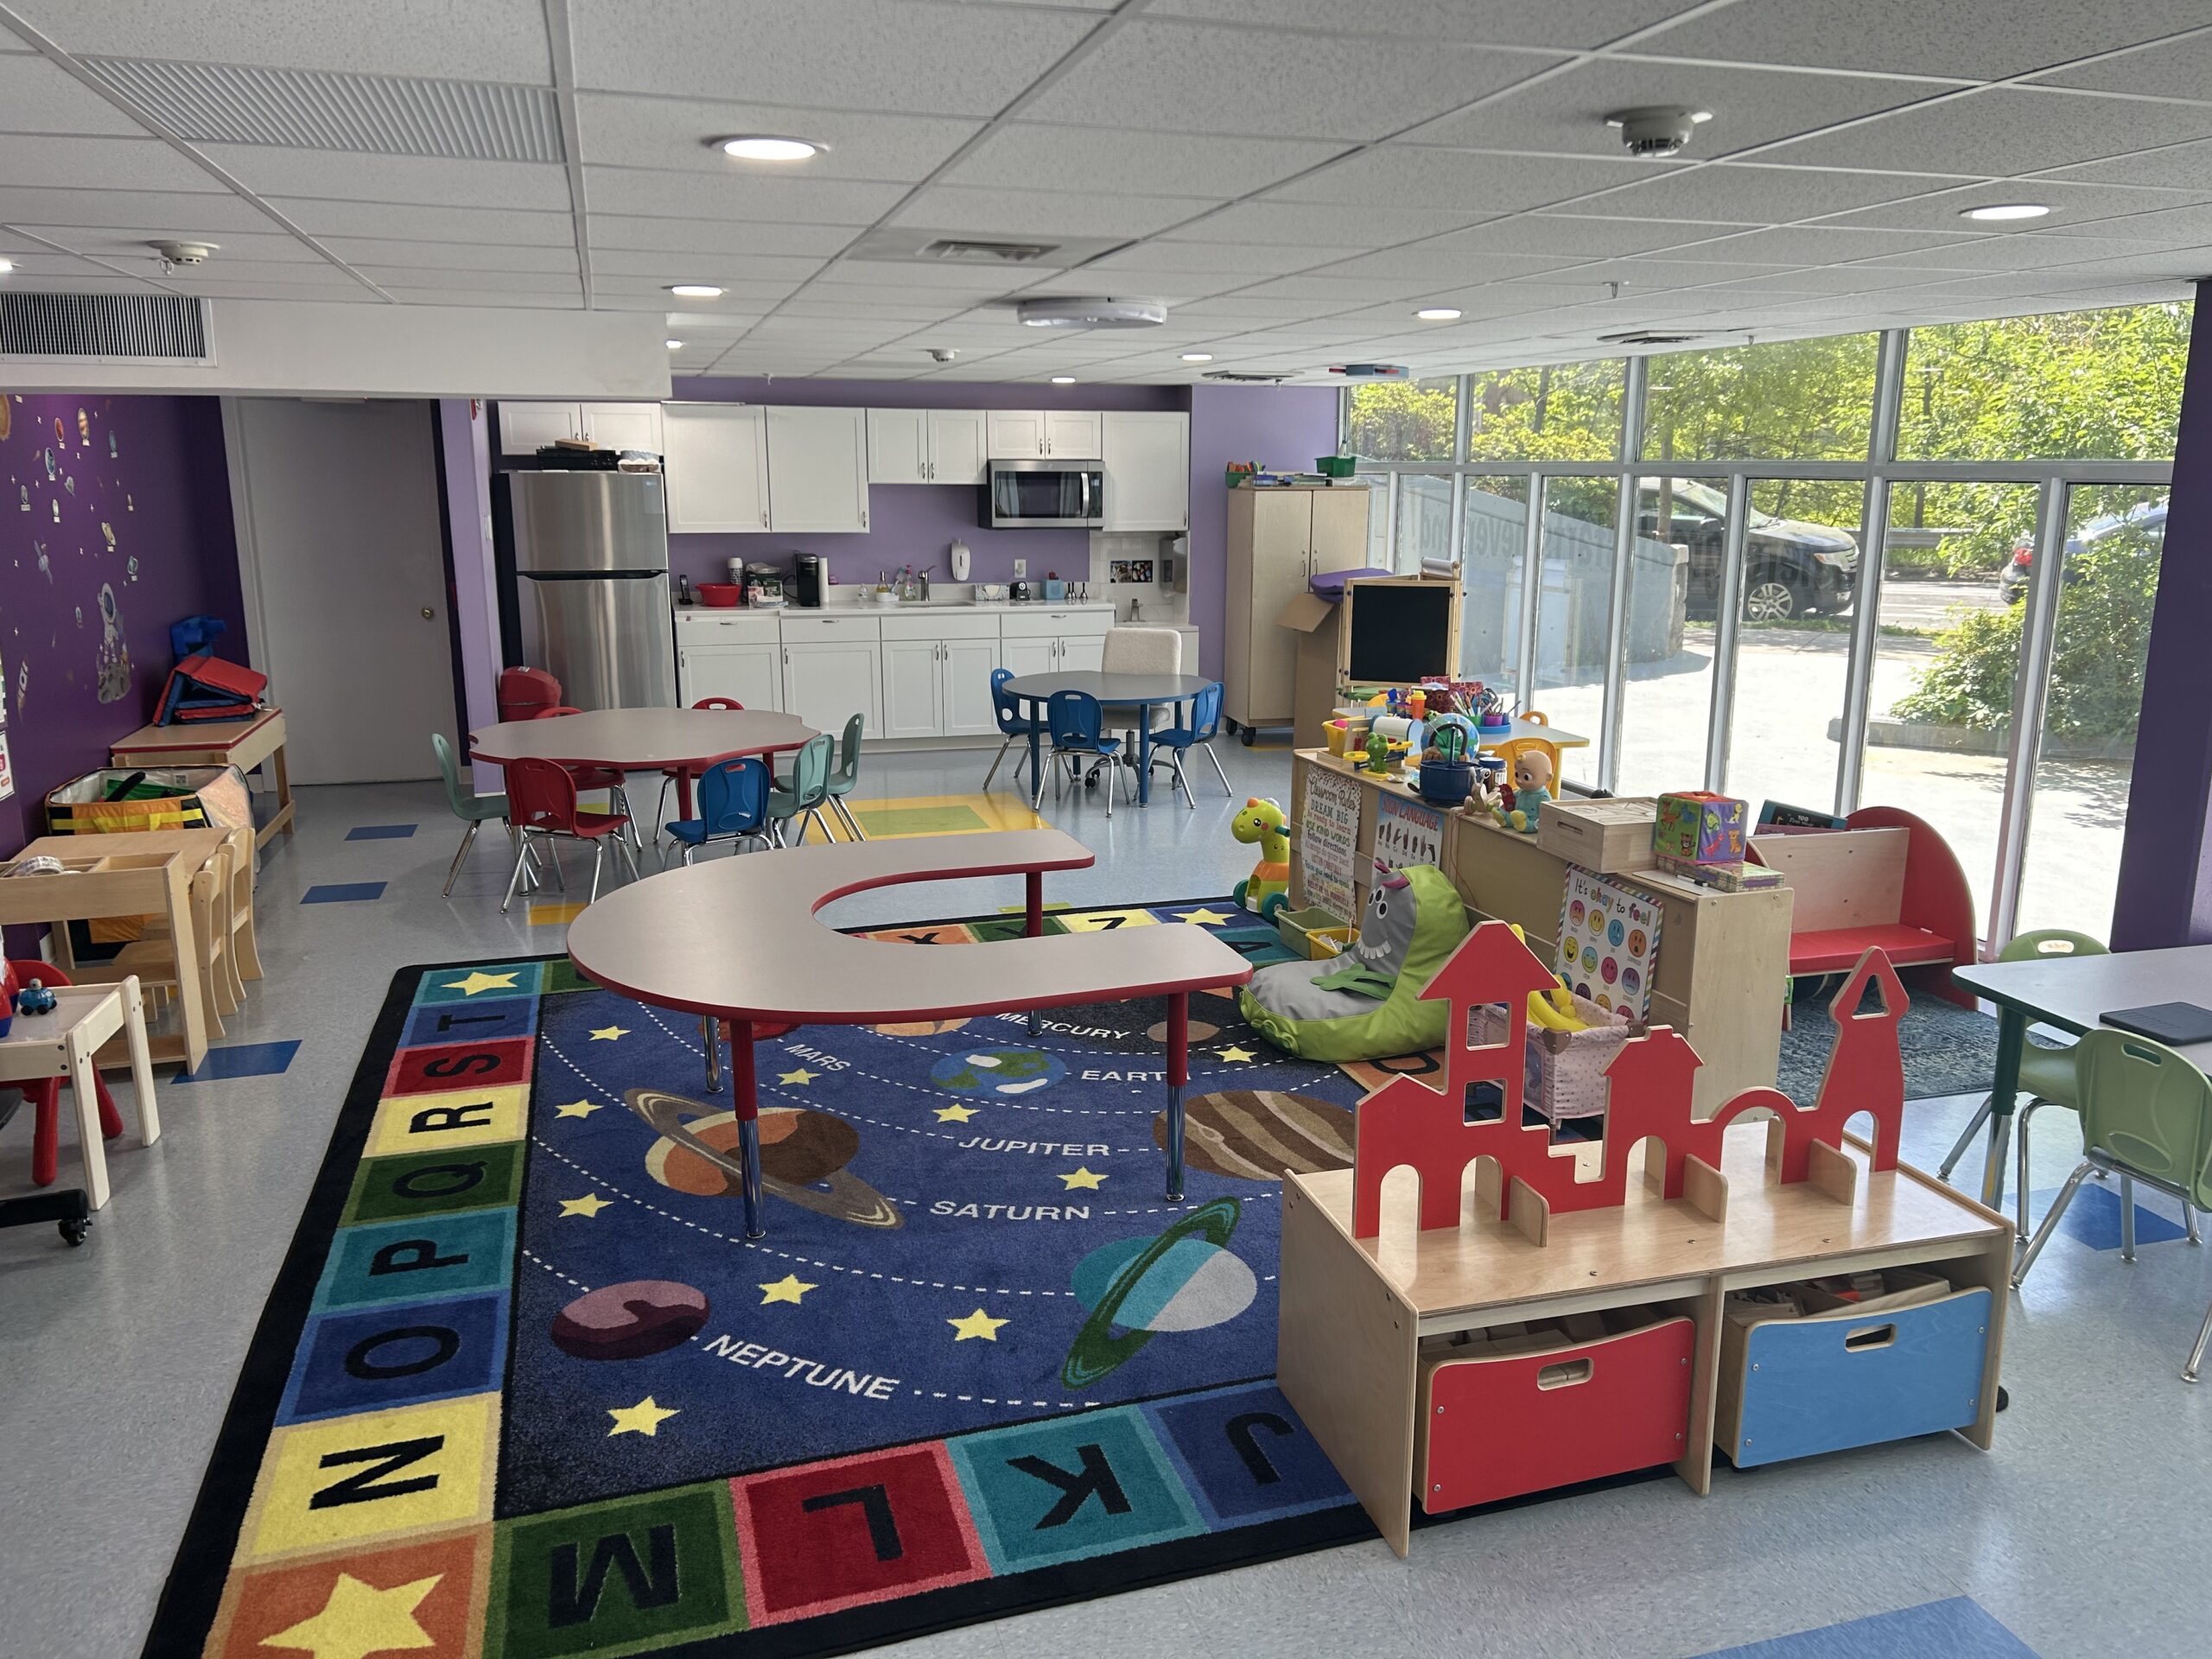 Our "Space Room" hosts our Pre-School and Pre-K students